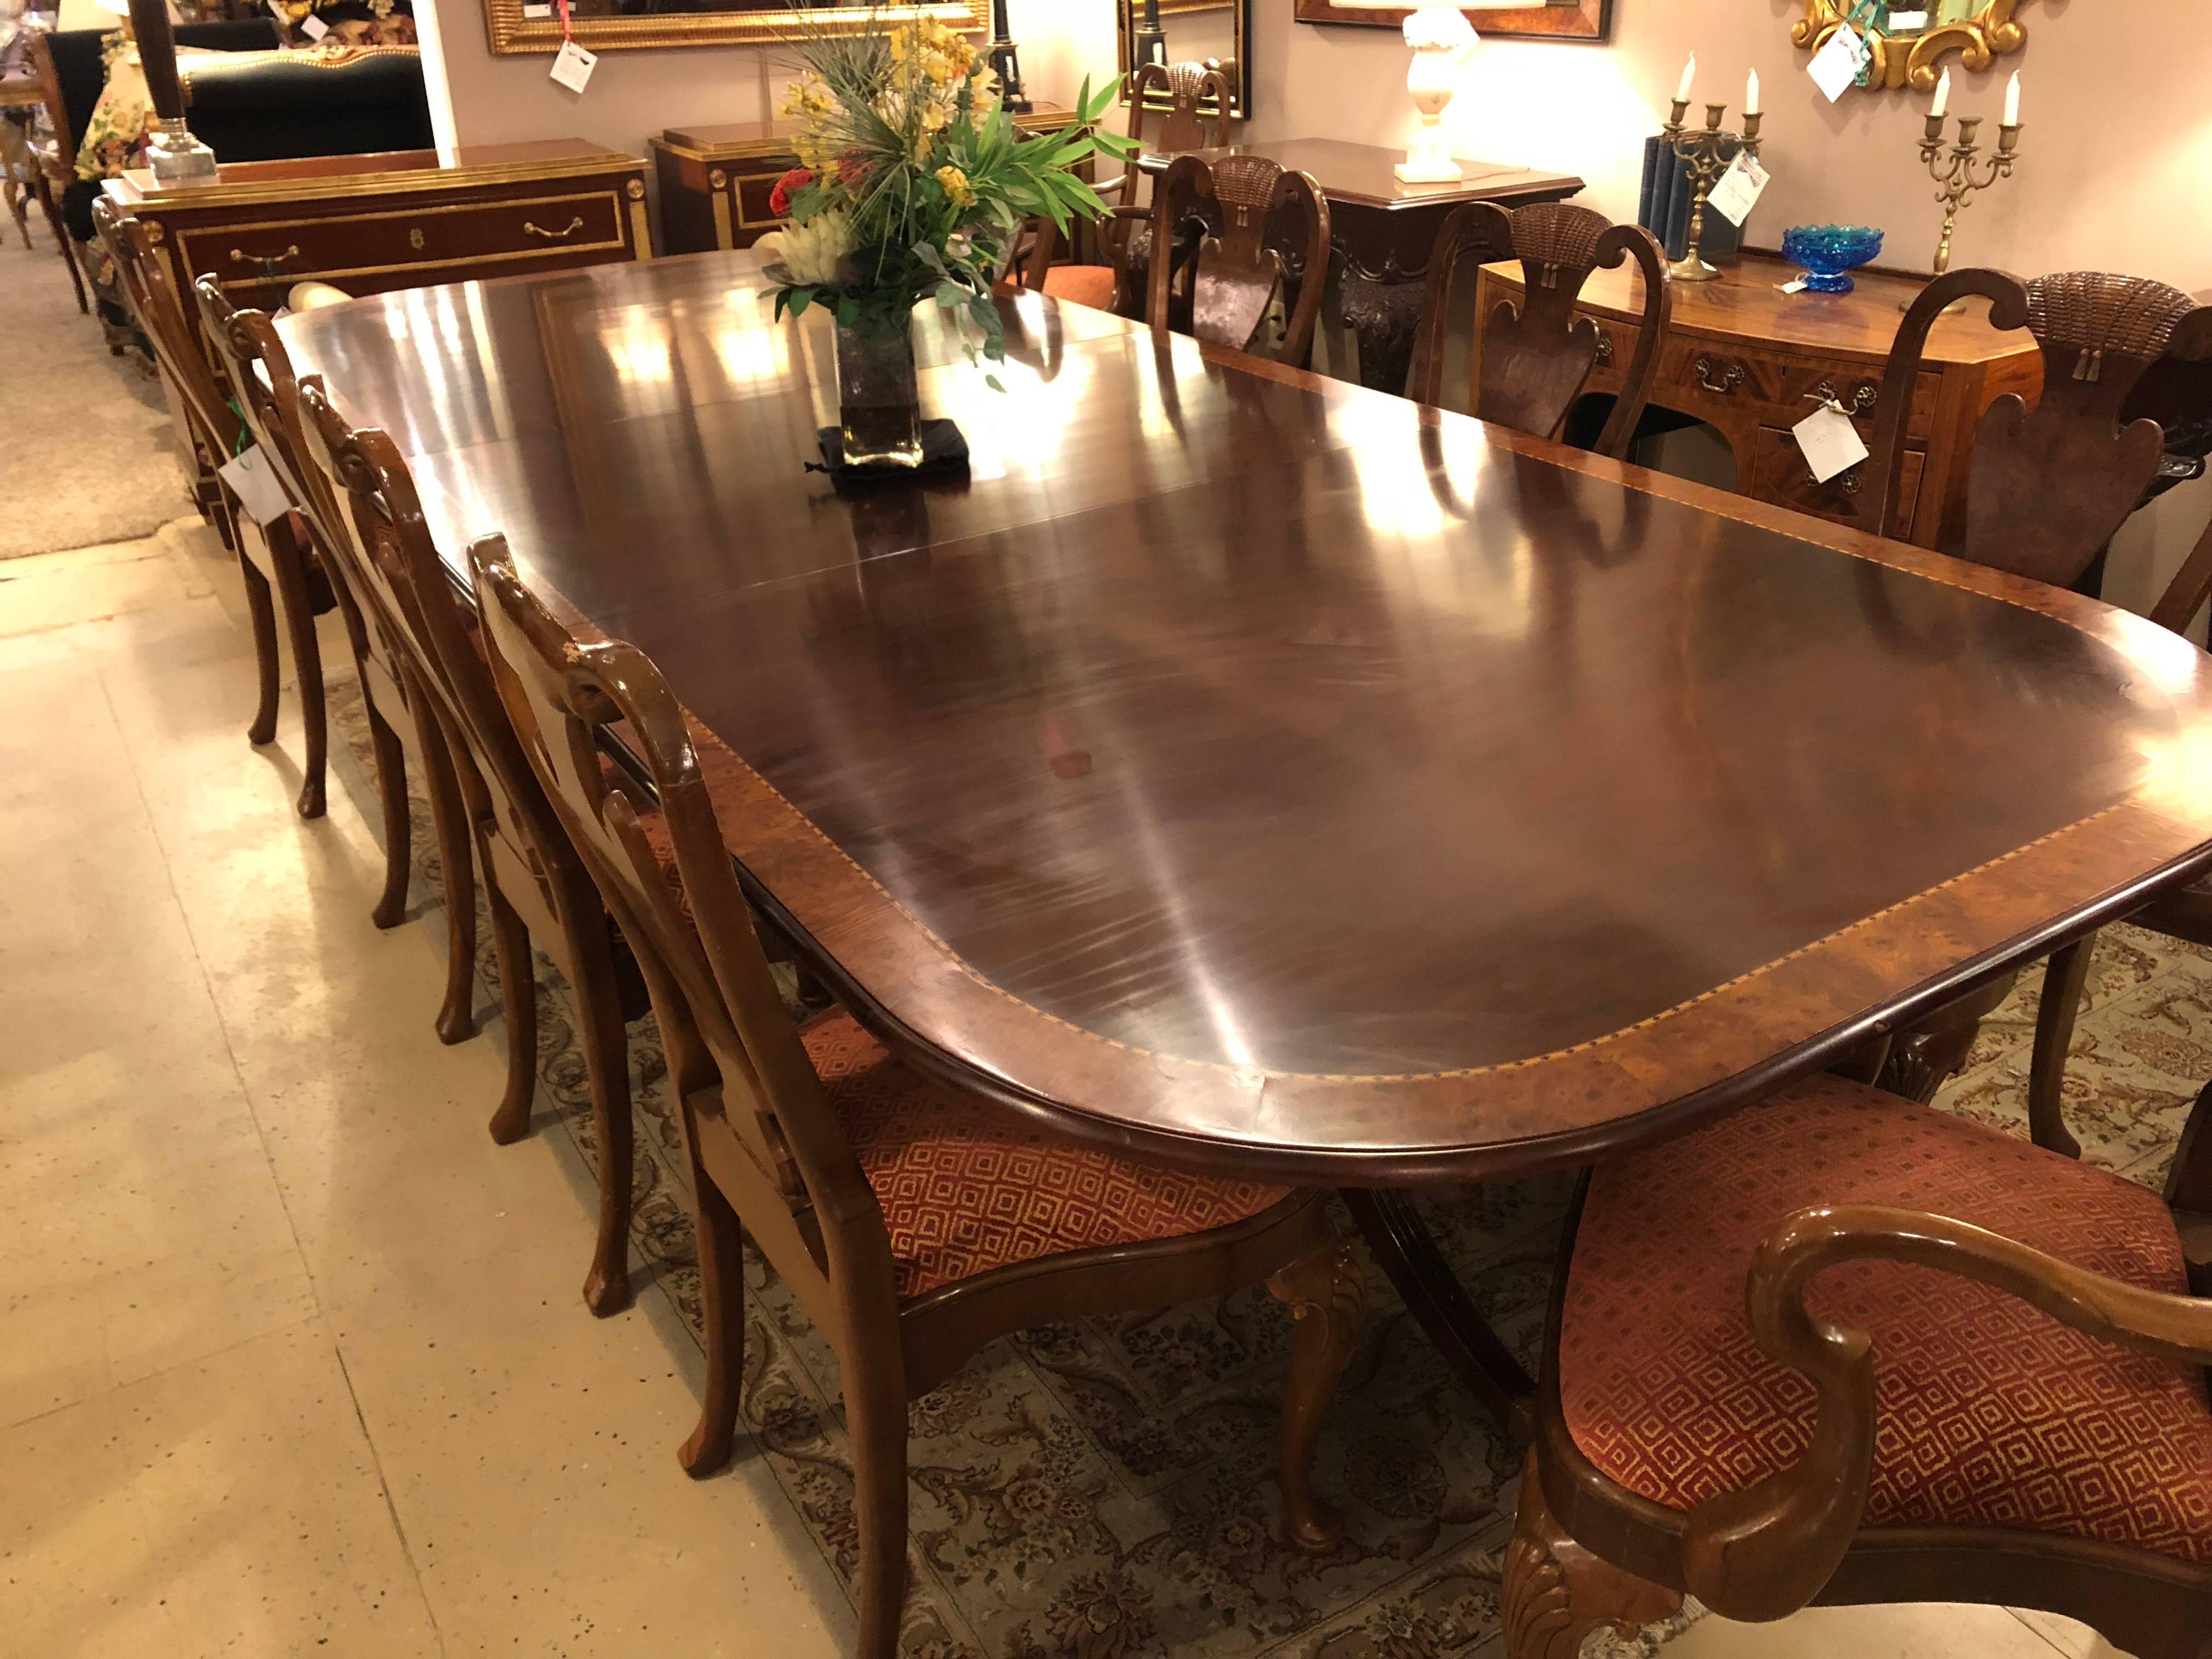 Monumental Georgian style banded dining room table with two 30 inch leaves. Table Width measures 156 inches with fully extended. Finely carved tripod double pedestal legs on brass casters support this burl-wood banded top dining table. The banding